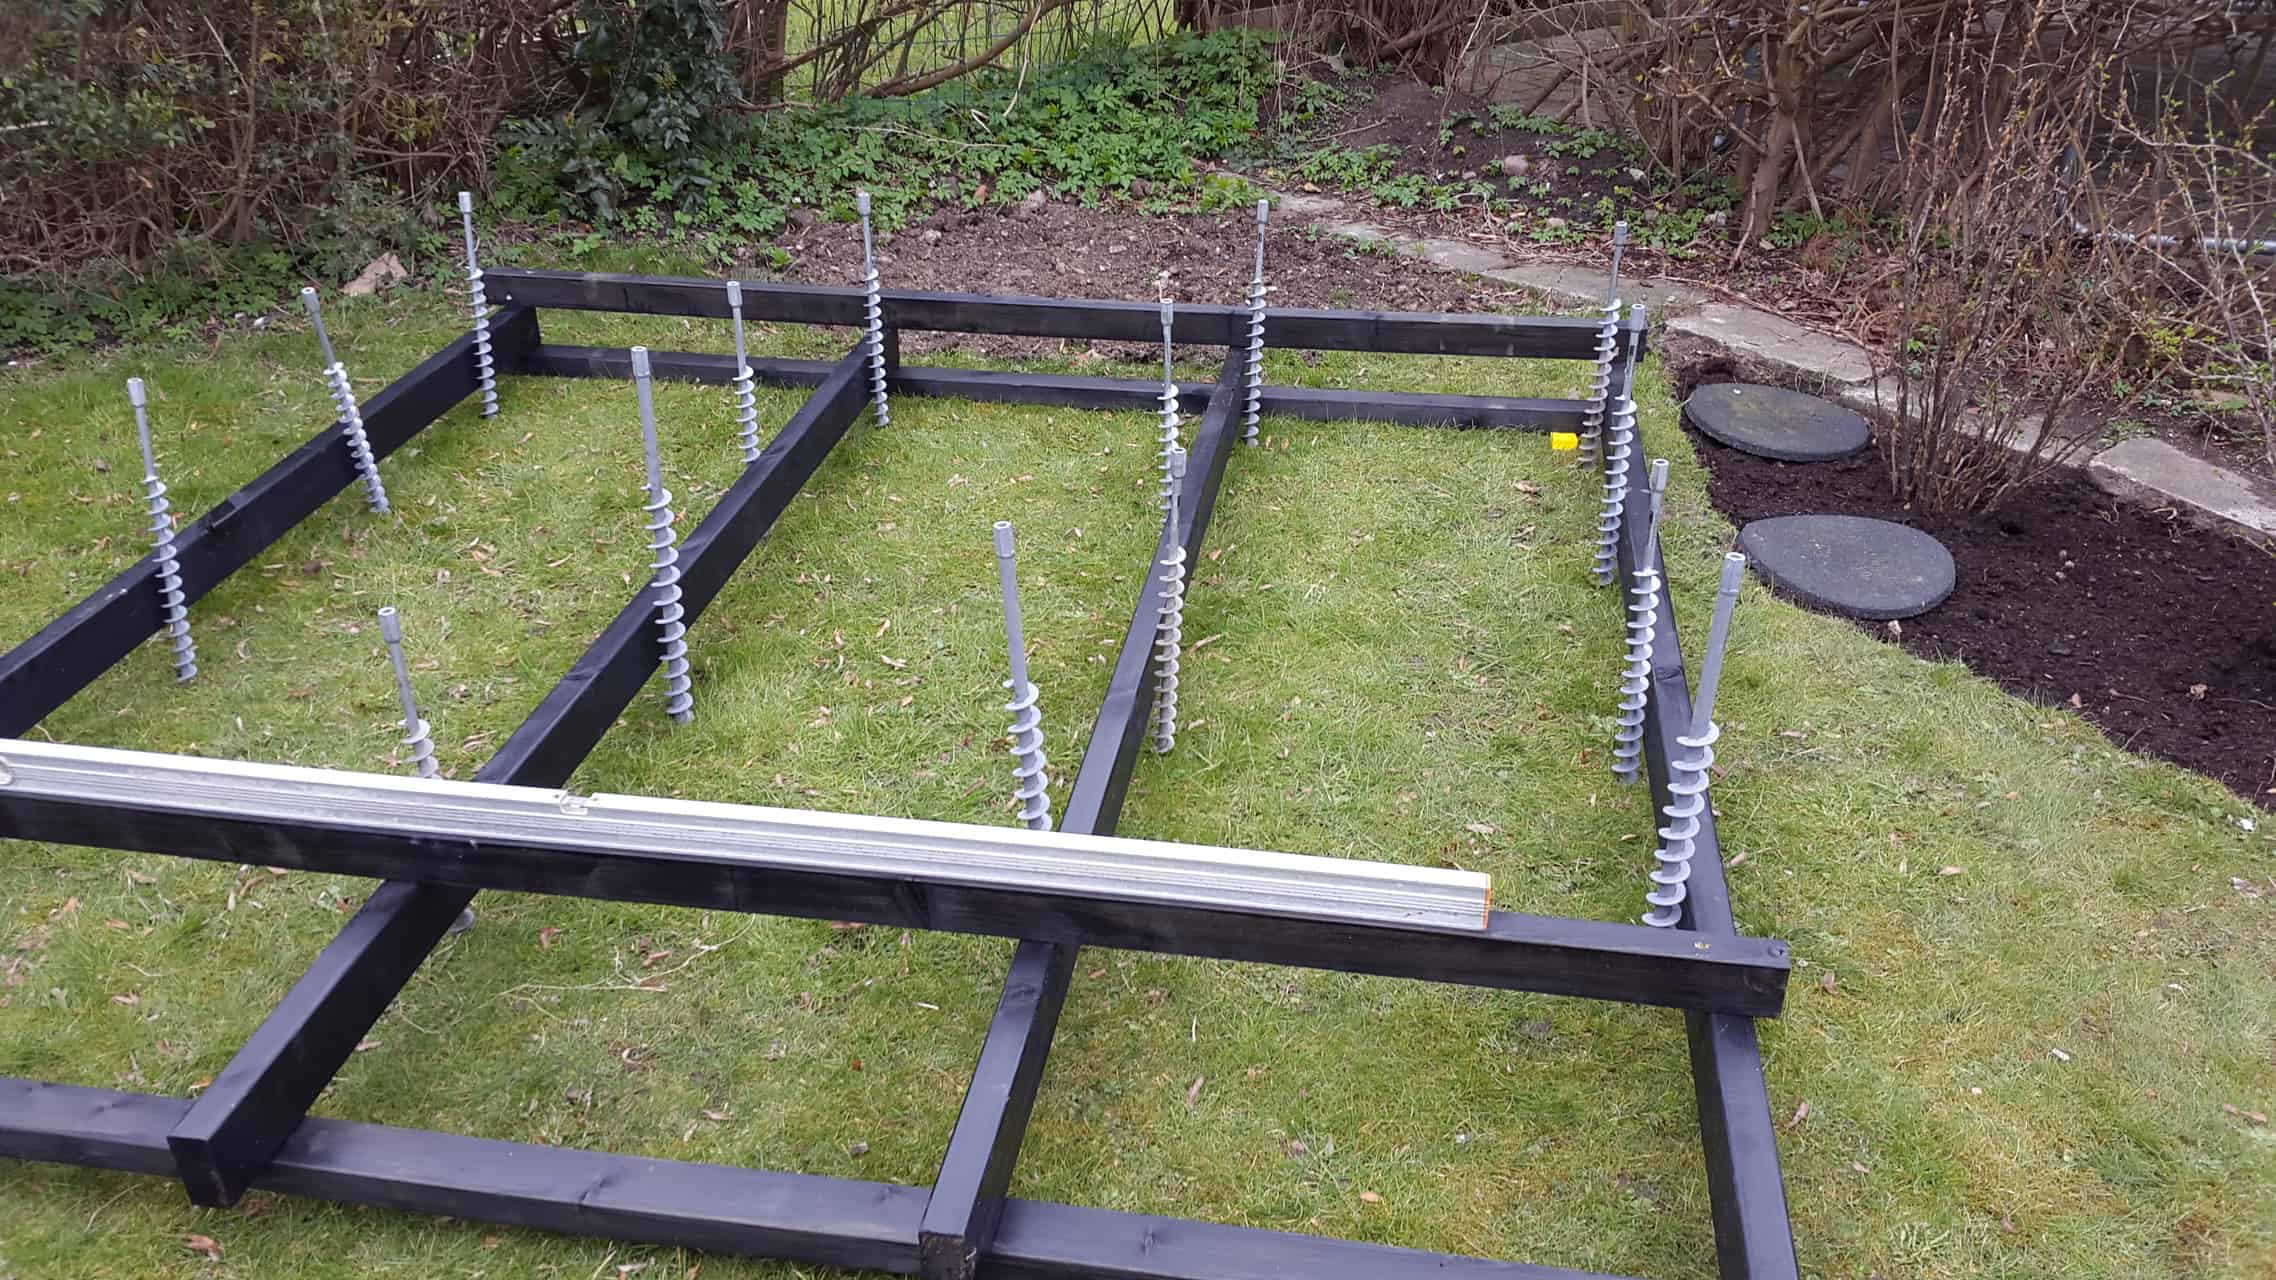 How to build a shed: Mounting the footings